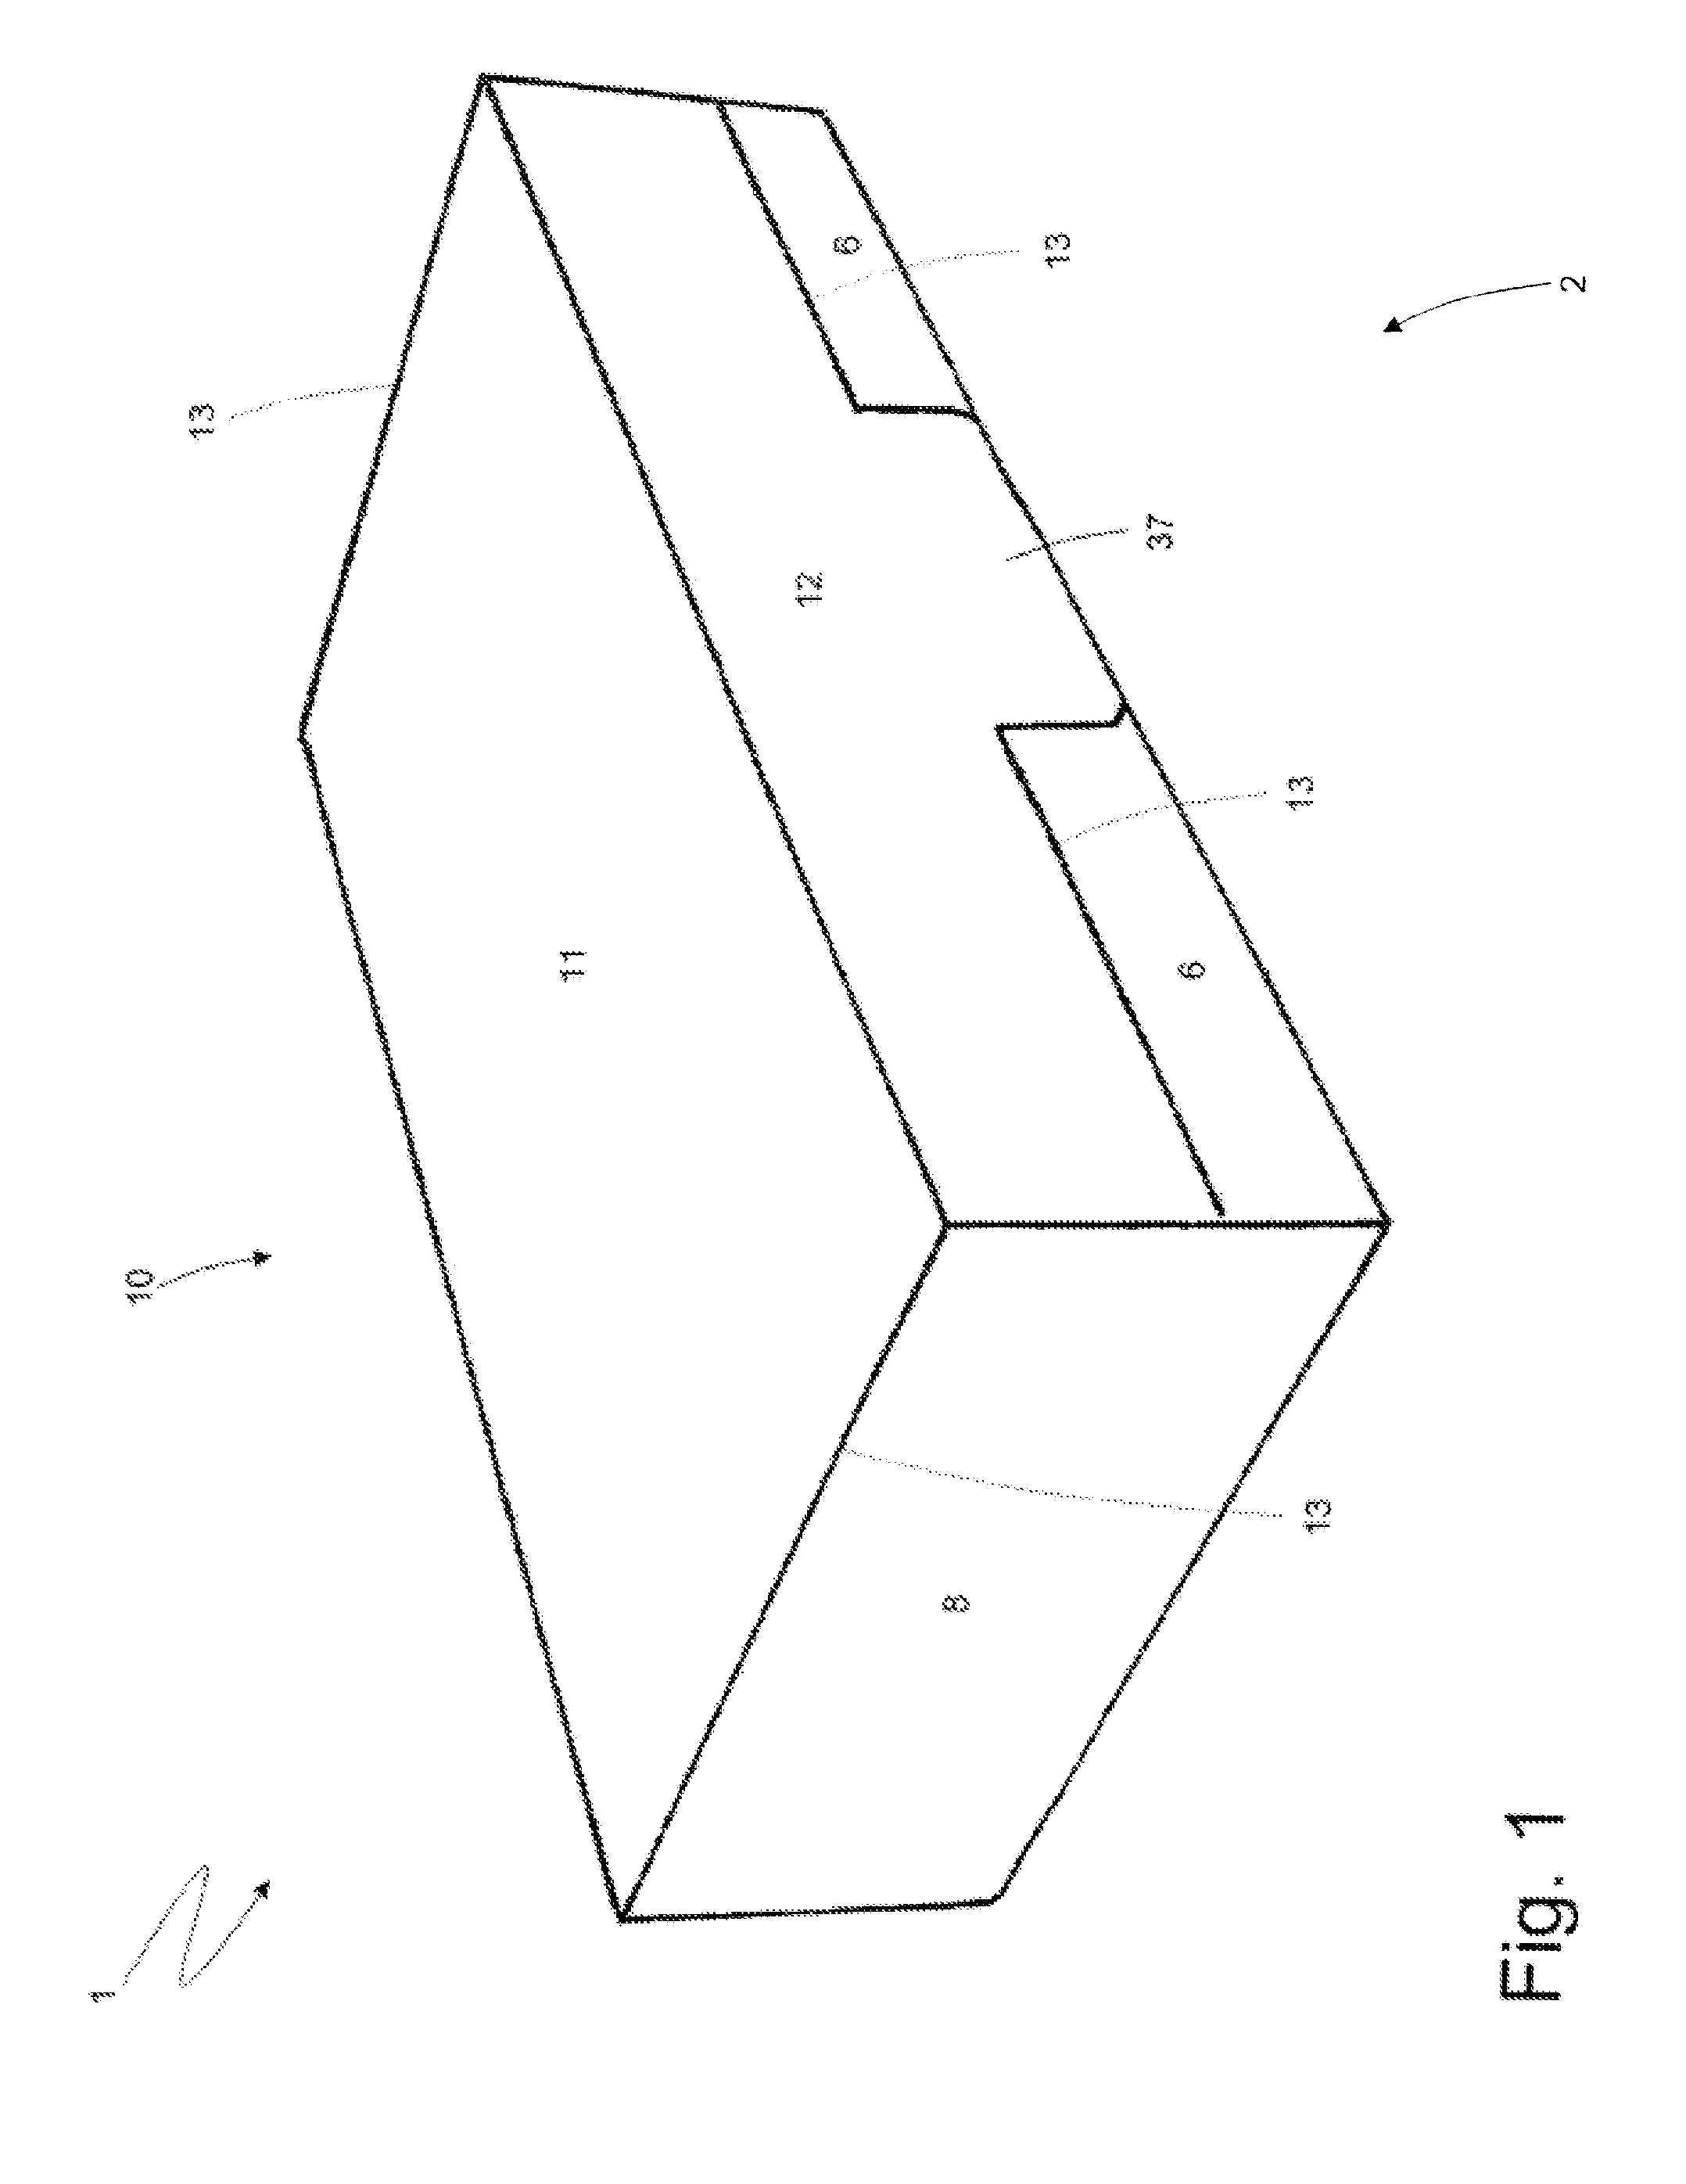 Hinged-lid package, and packing method and machine for producing a hinged-lid package